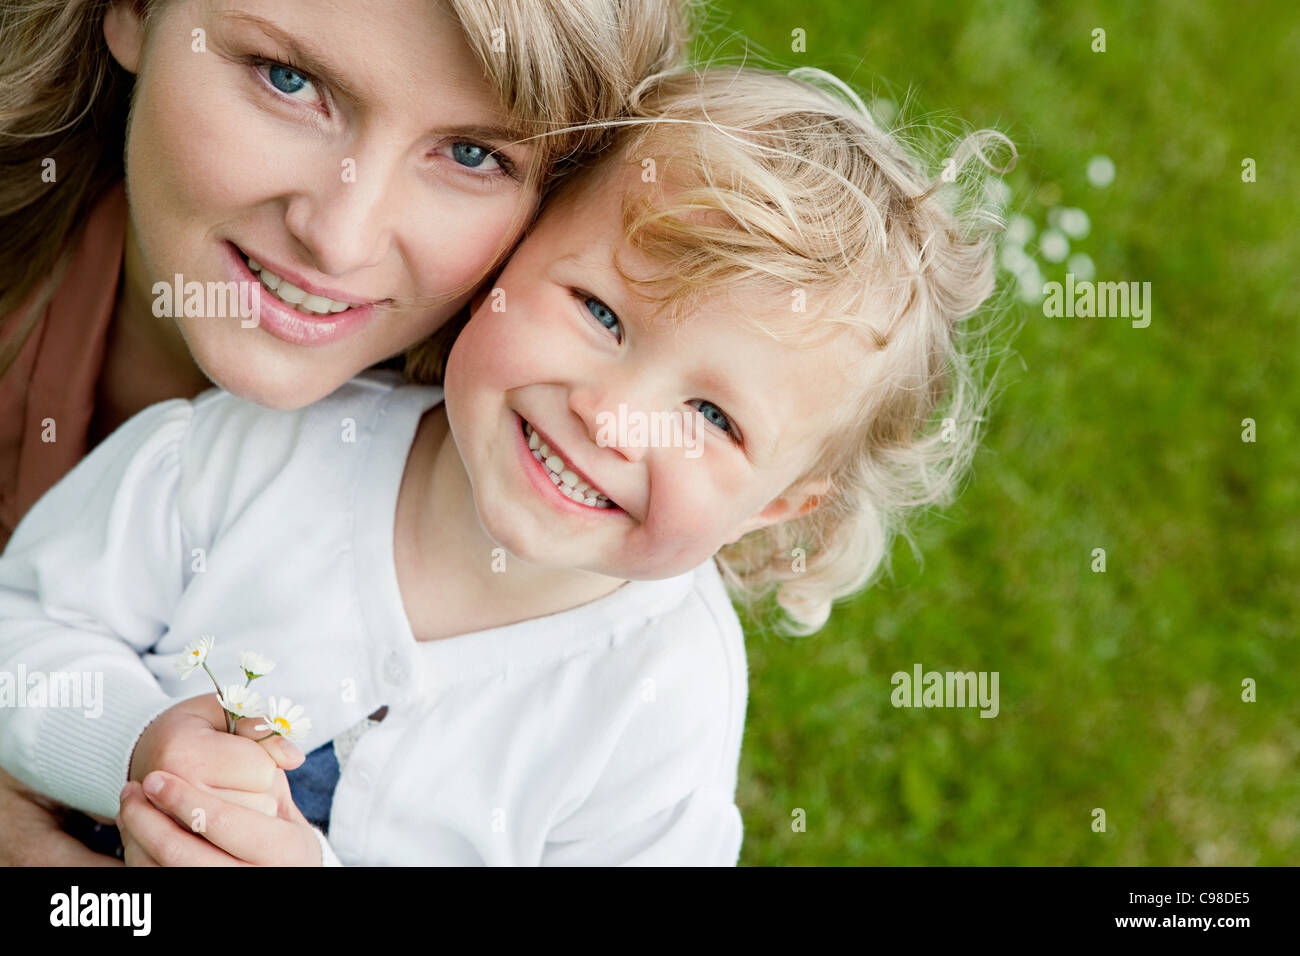 Mother and daughter holding daisies, high angle portrait Stock Photo